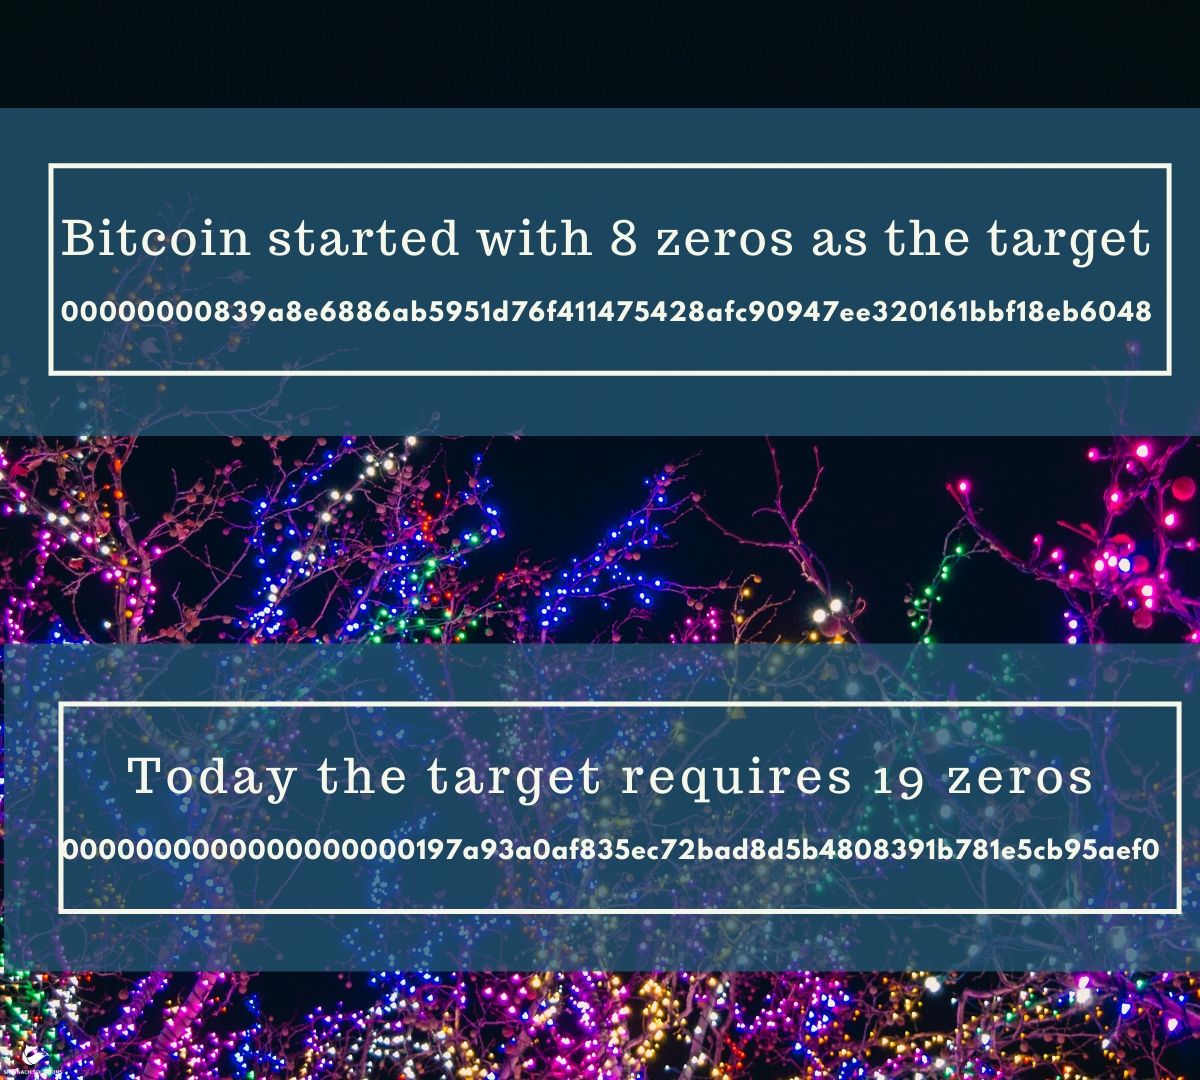 Bitcoin started with a target of 8 leading zeros, e.g. 00000000839a8e6886ab5951d76f411475428afc90947ee320161bbf18eb6048. Today it requires 19 leading zeros, e.g. 0000000000000000000197a93a0af835ec72bad8d5b4808391b781e5cb95aef0.